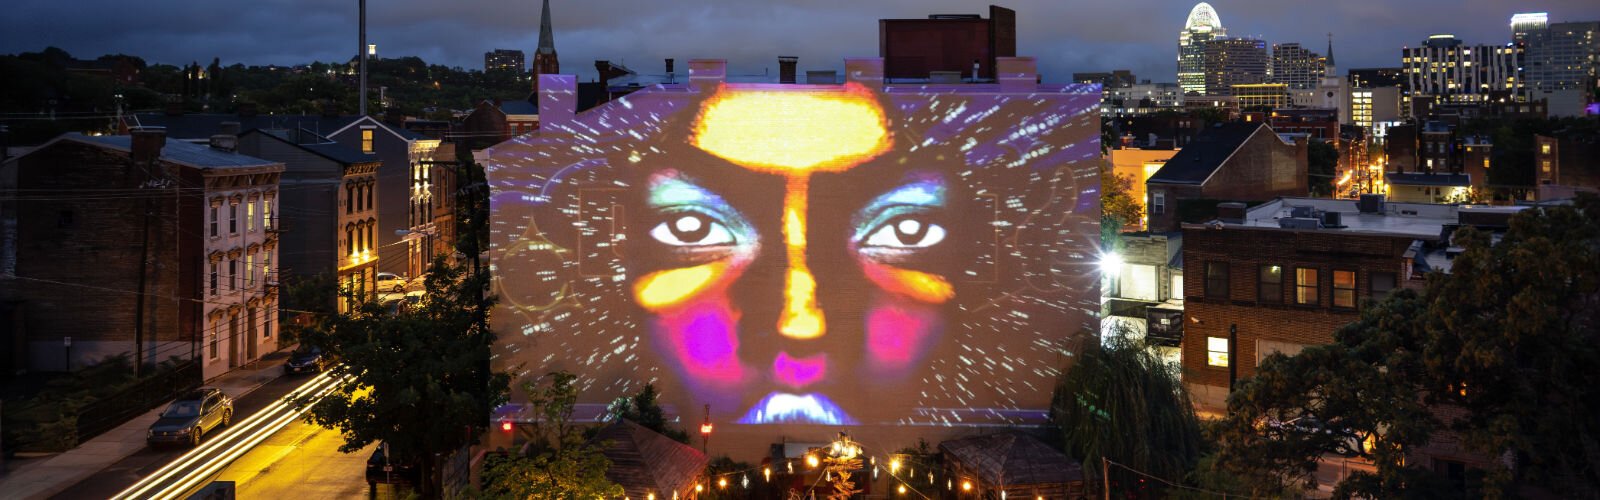 As a finale to ArtWorks’ community celebration ArtAmplified, on June 11, Brave Berlin presented mural-inspired projections outside of Somerset Bar. 